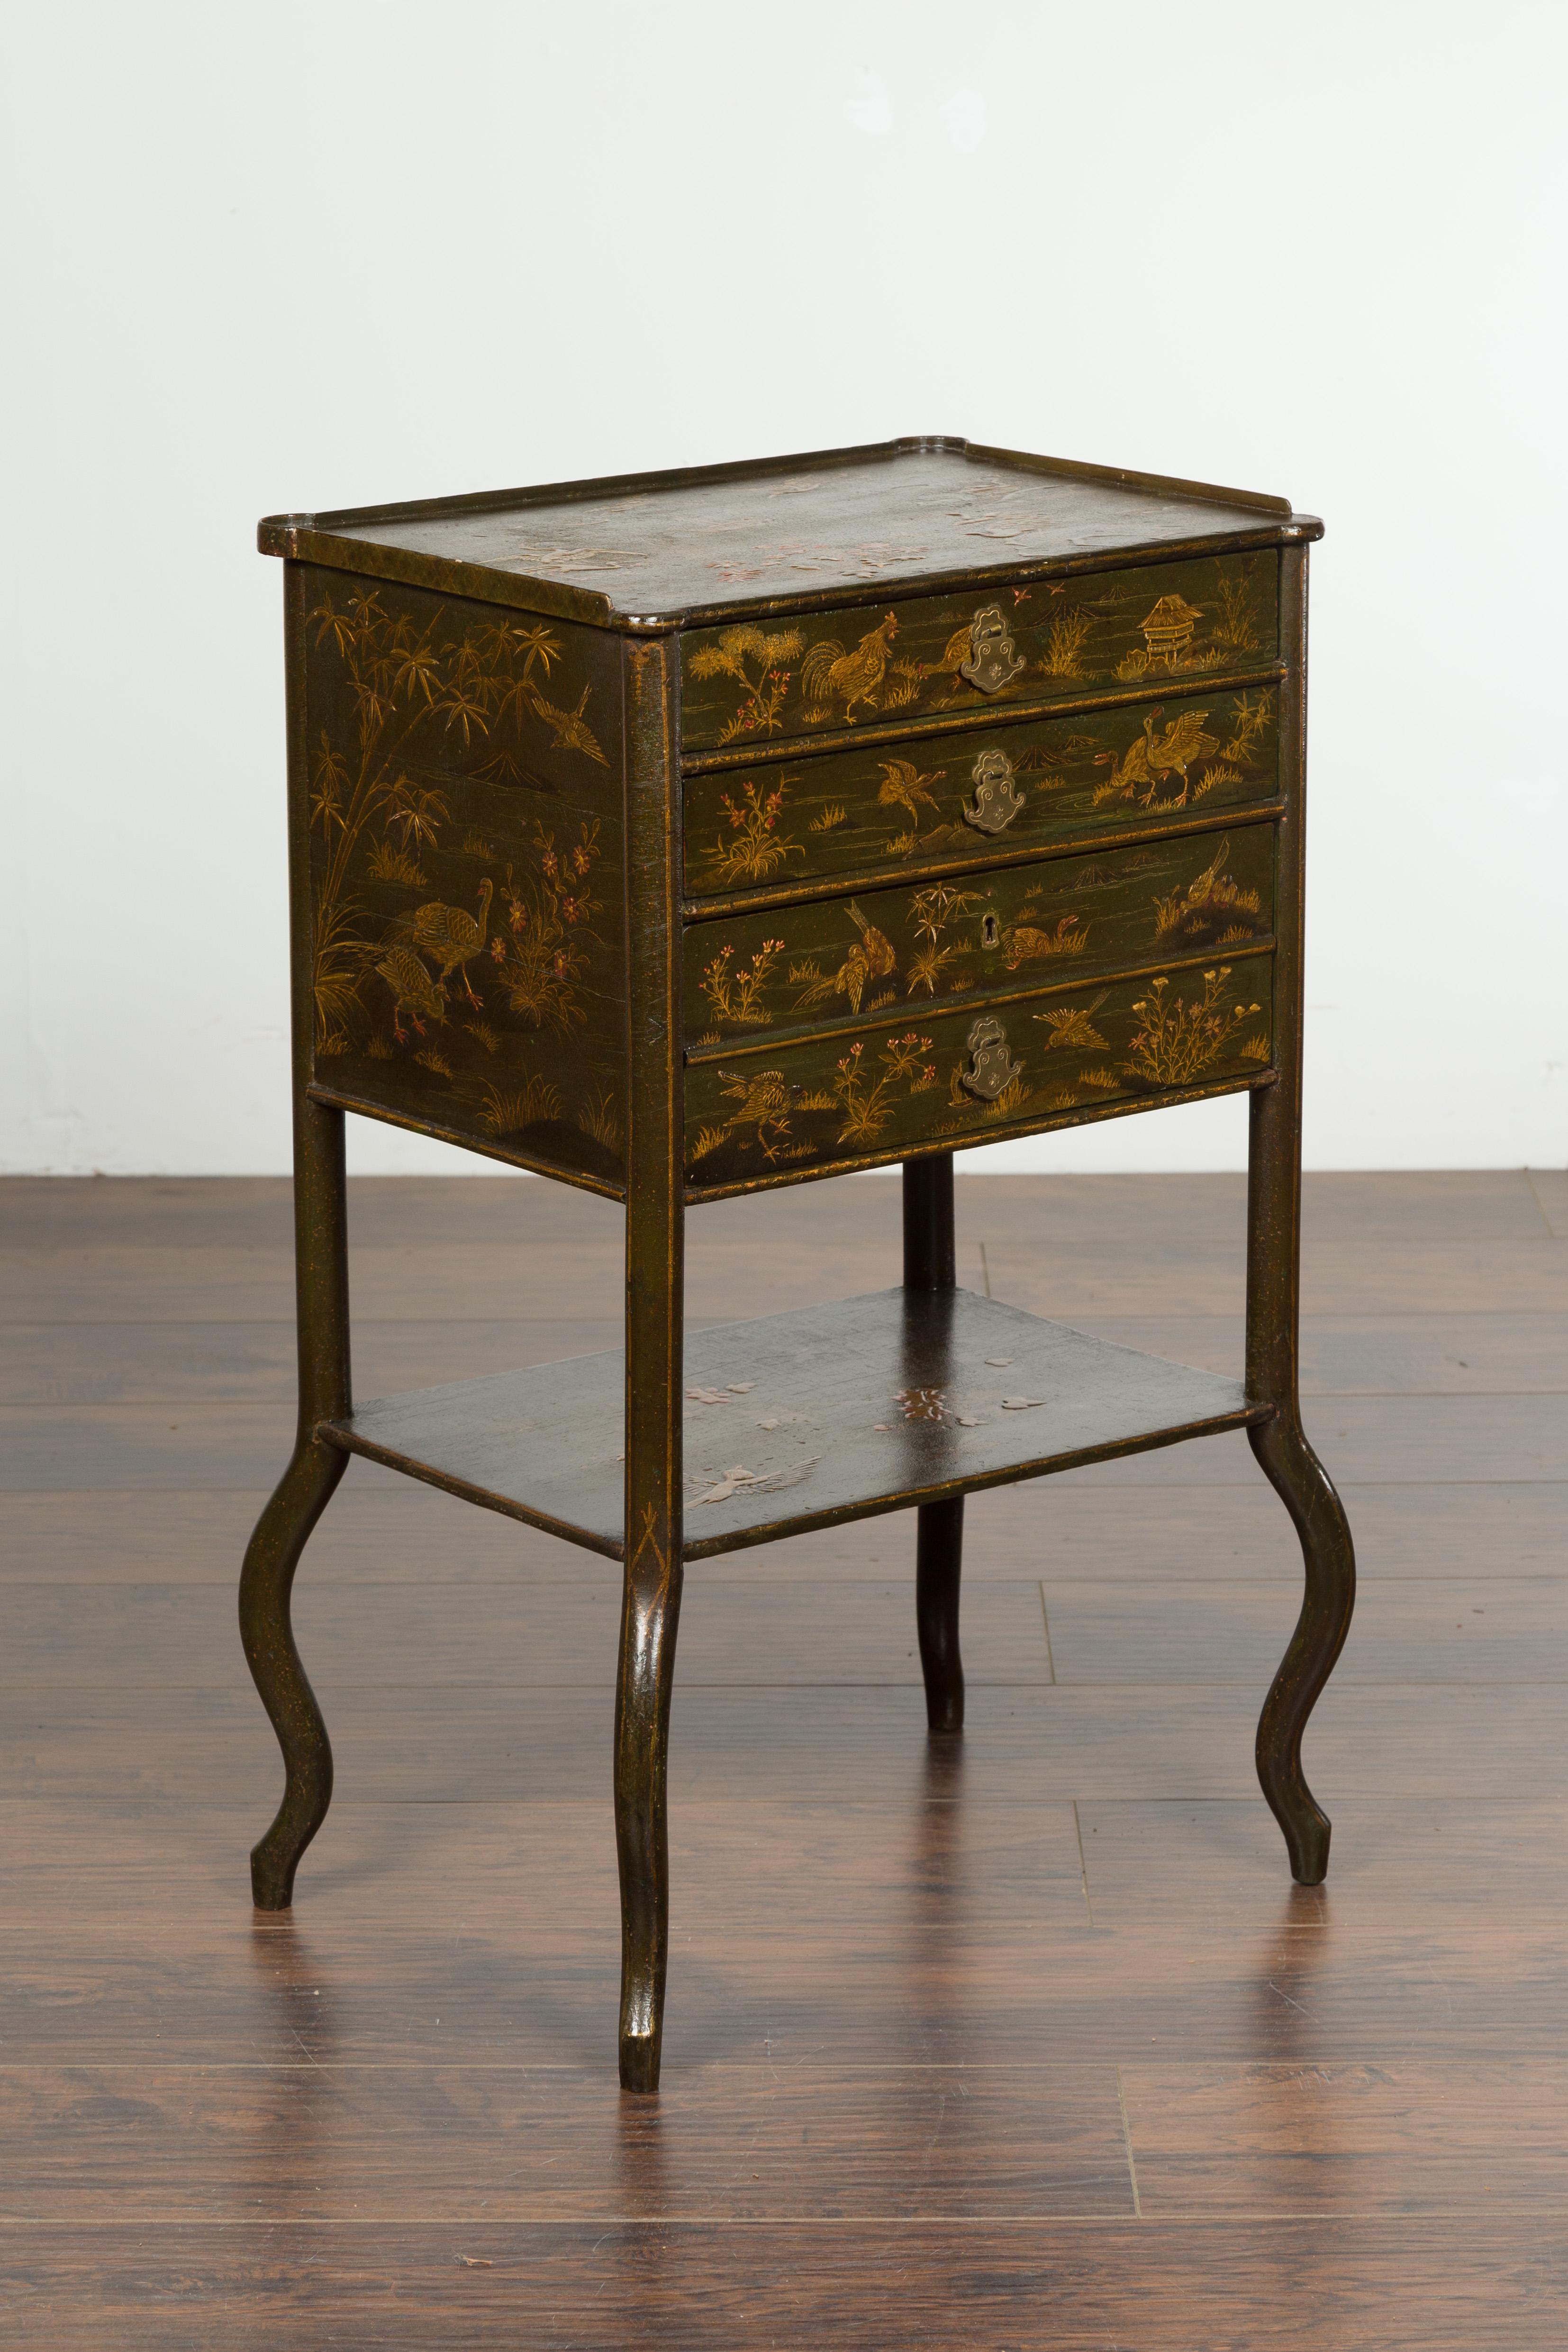 Lacquered English 19th Century Chinoiserie Table with Four Drawers, Shelf and Curving Legs